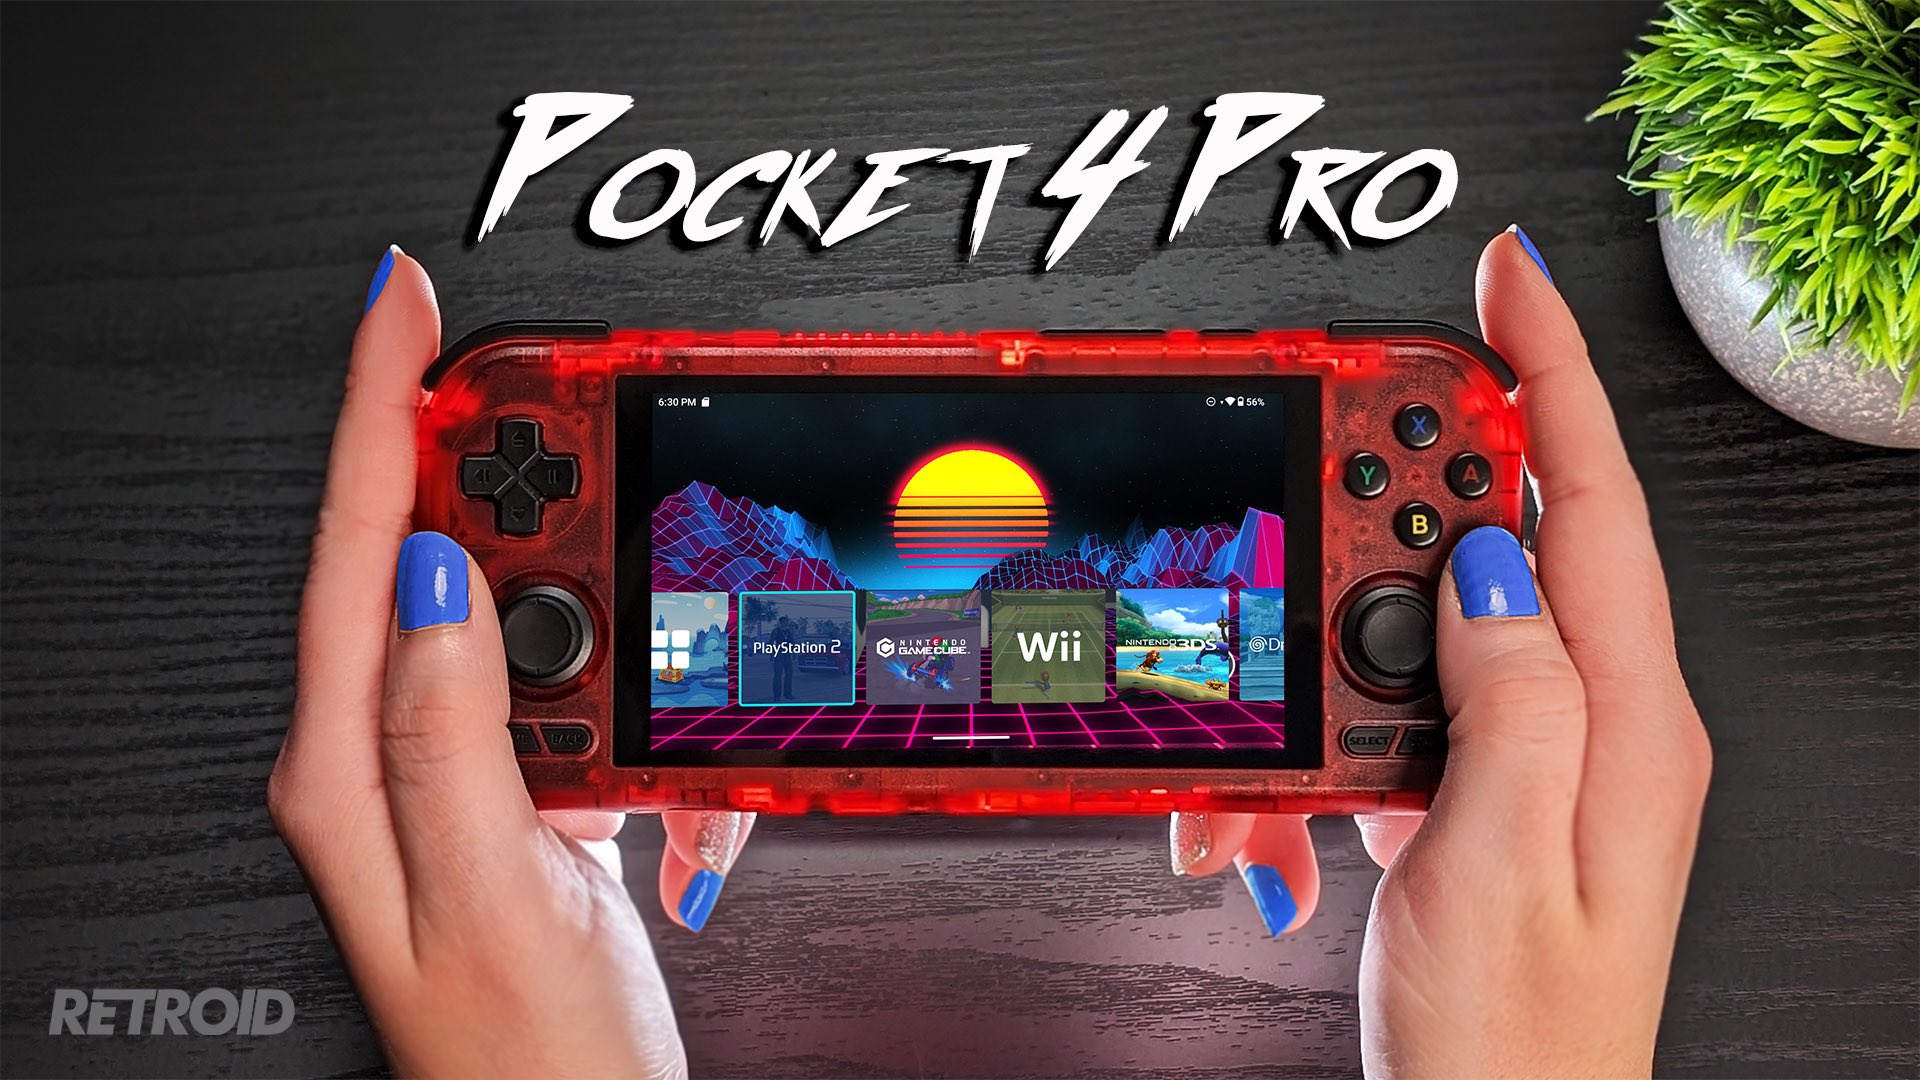 Retroid Pocket 4 Pro Review - All this for $200?! 